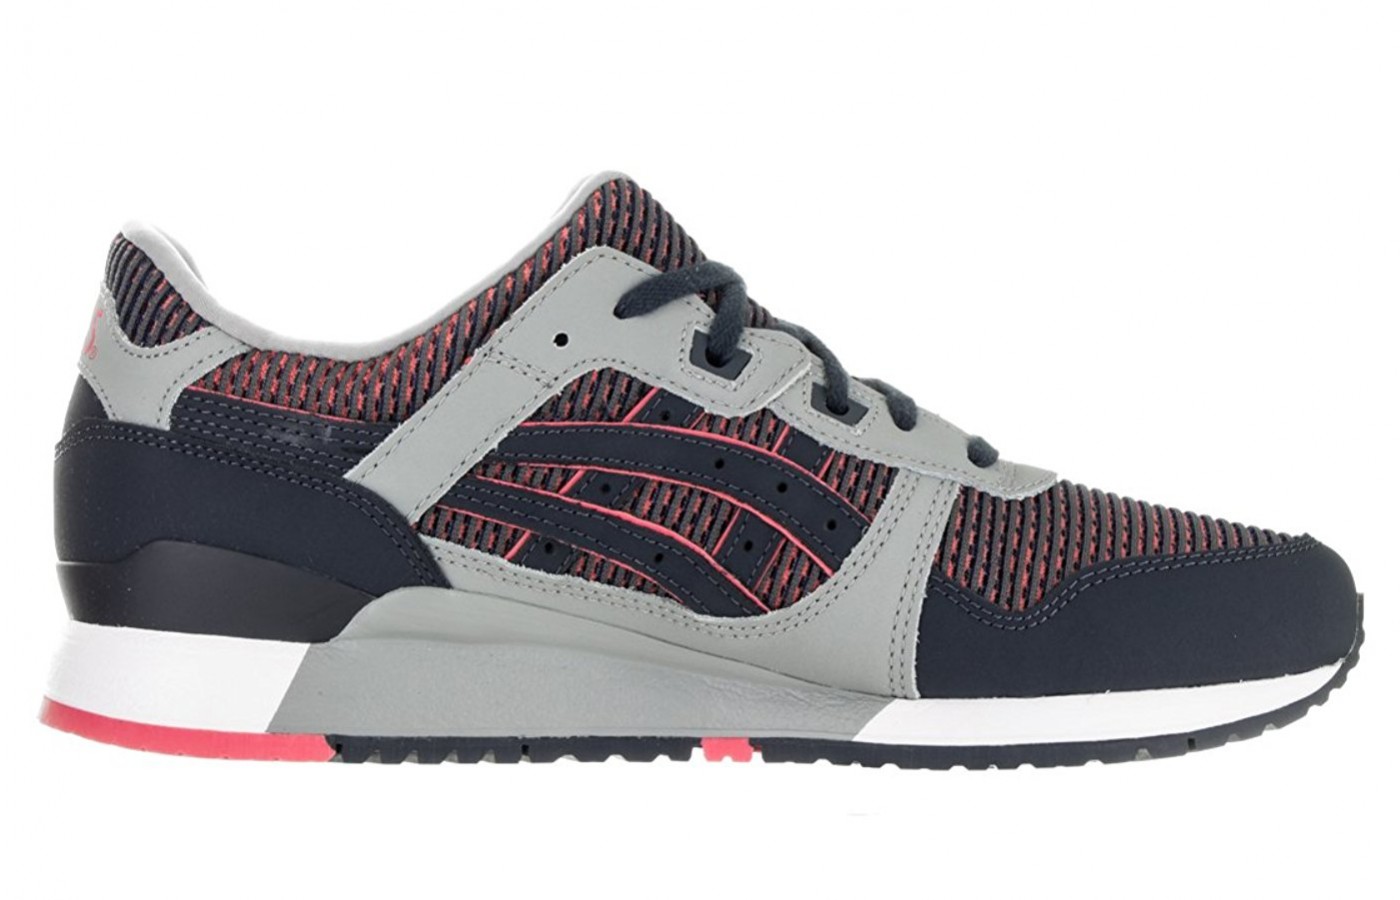 left to right view of the Asics gel lyte III